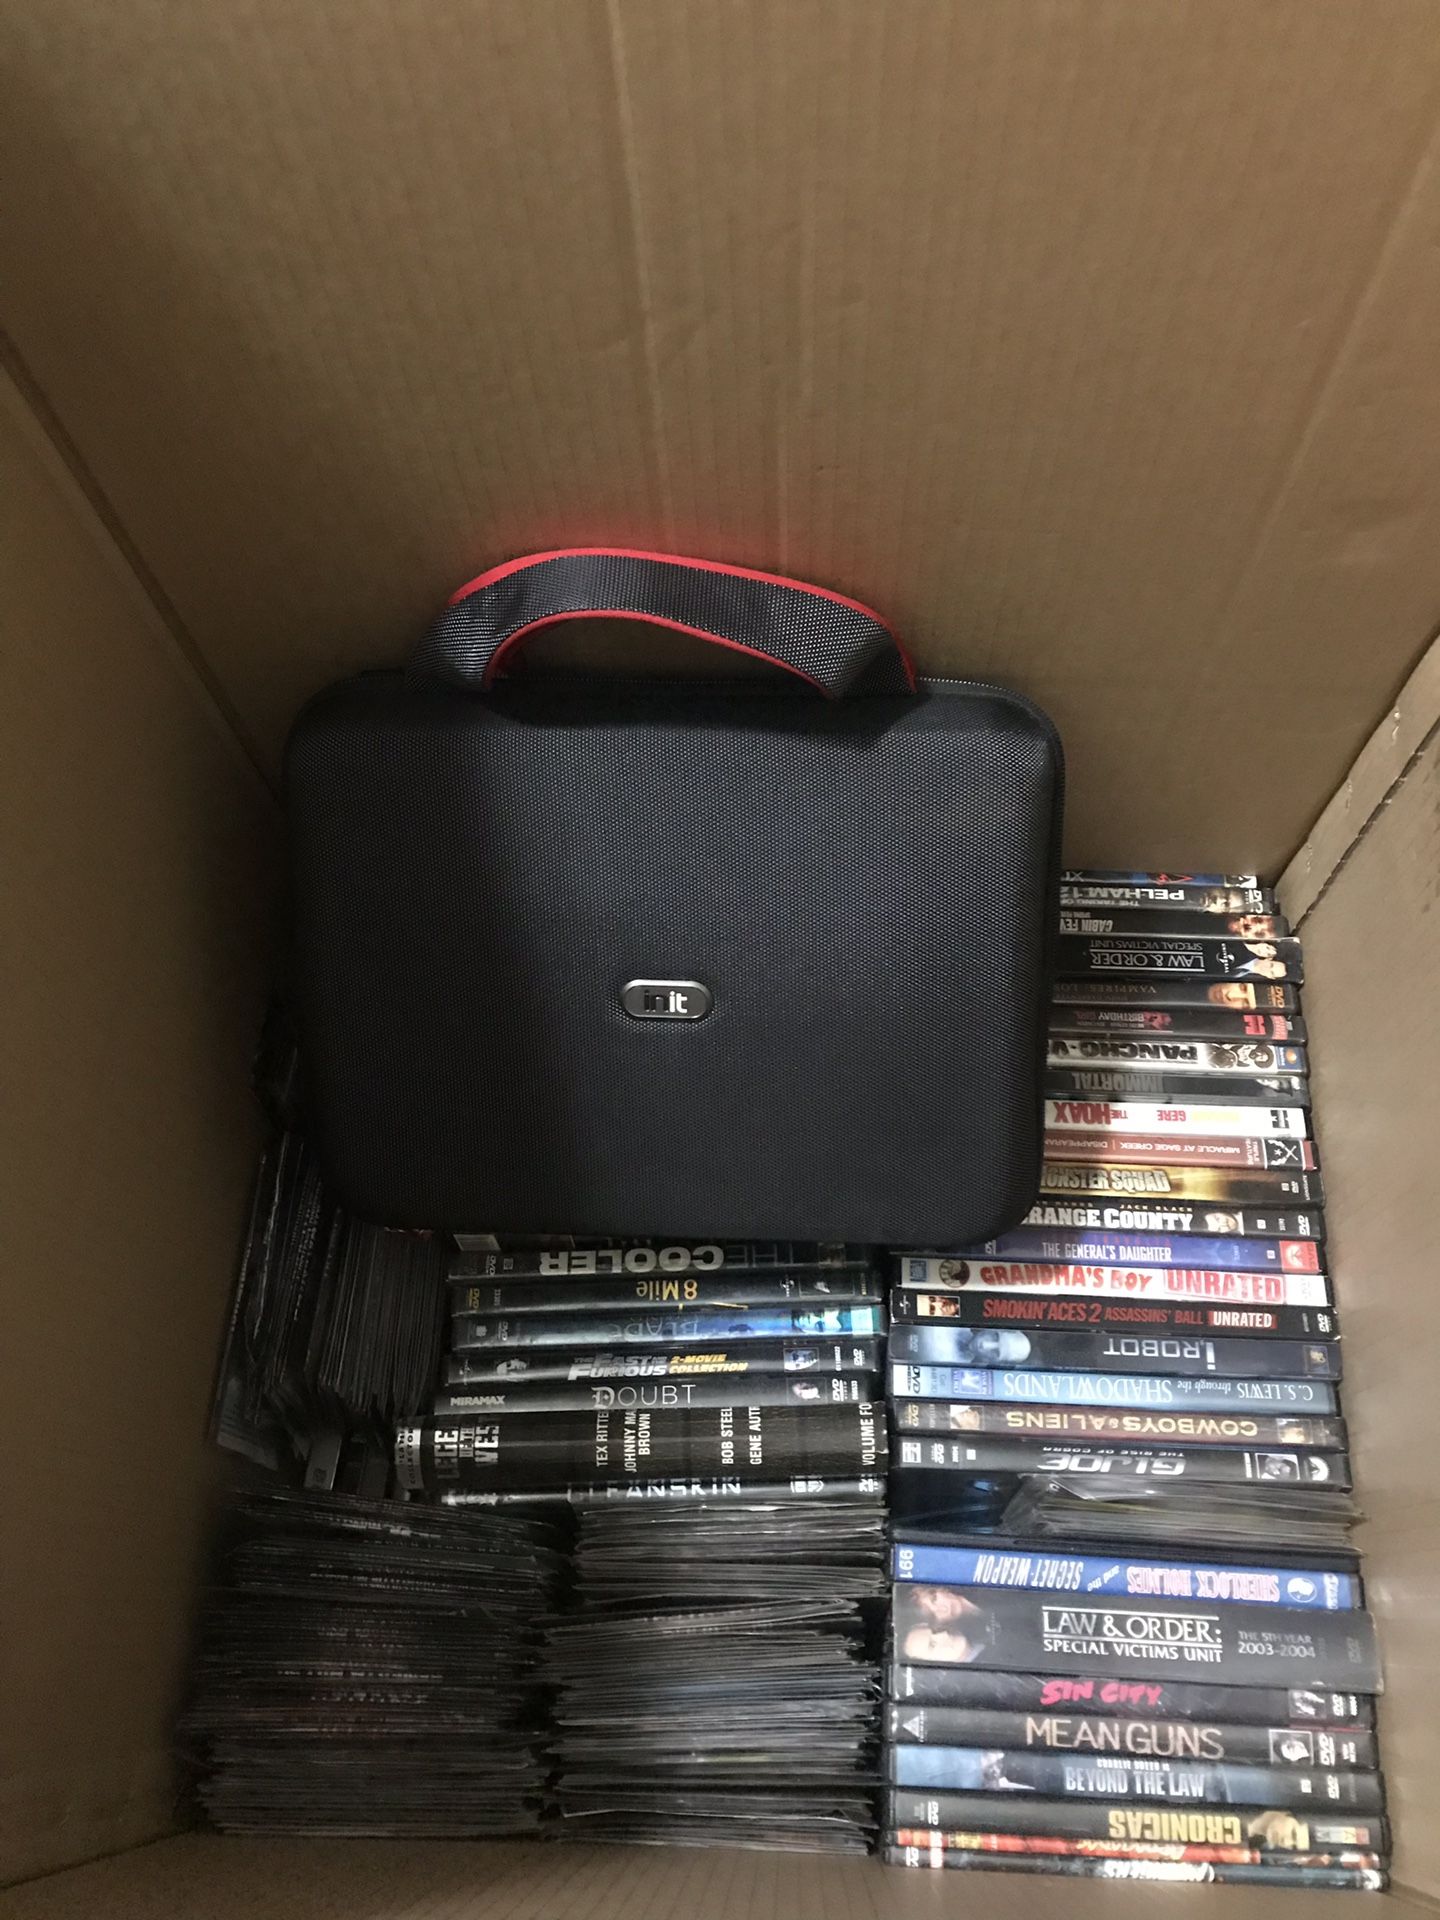 Over 300 Movie DVDs. Approximately 320!!! W/ Portable DVD Player and traveling case.